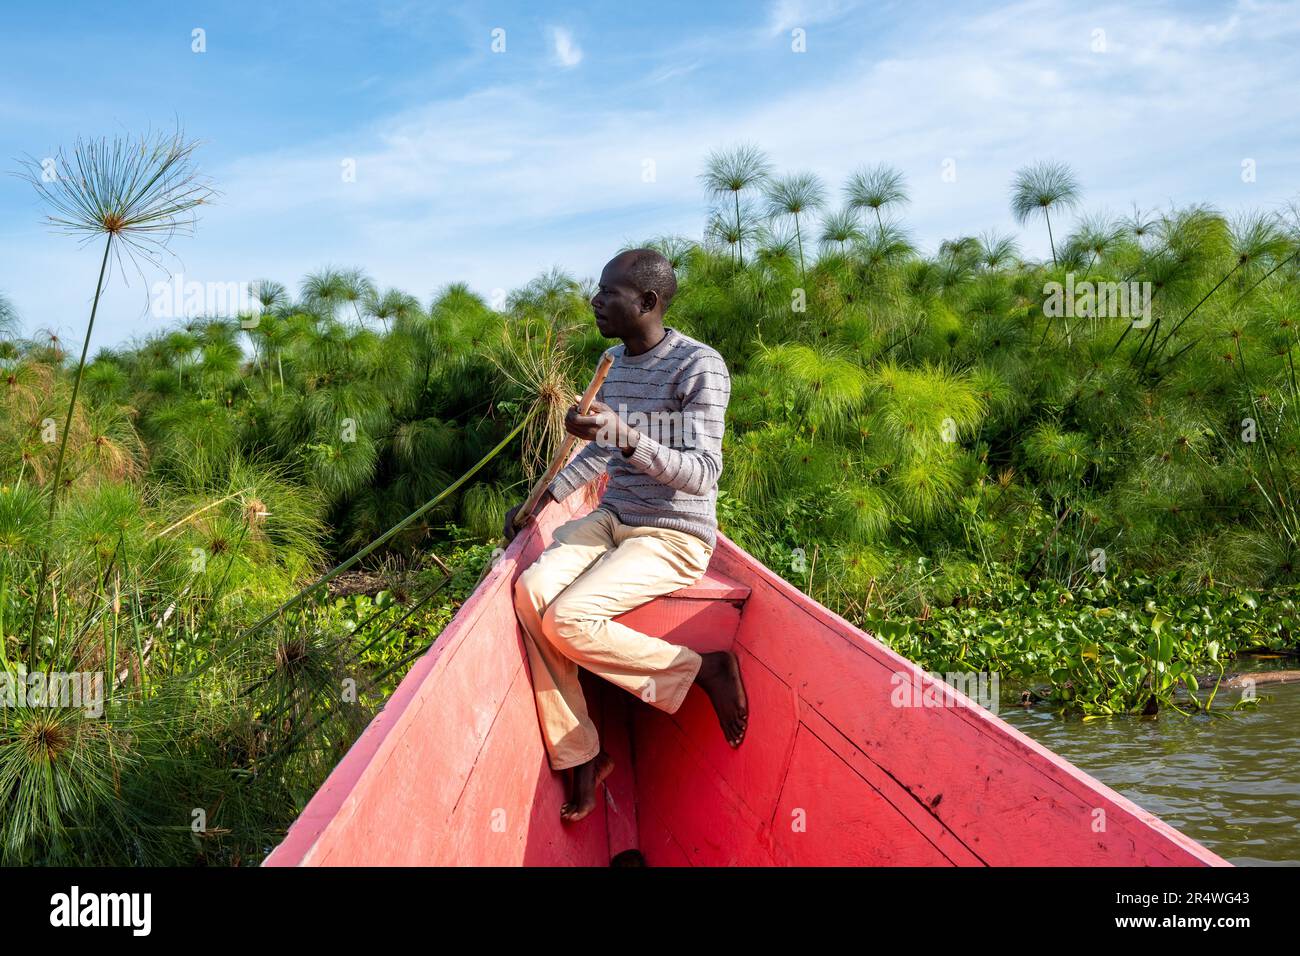 A local man sitting on the bow of a pink boat, sailing through Papyrus reed (Cyperus papyrus) field by Lake Victoria . Kenya, Africa. Stock Photo